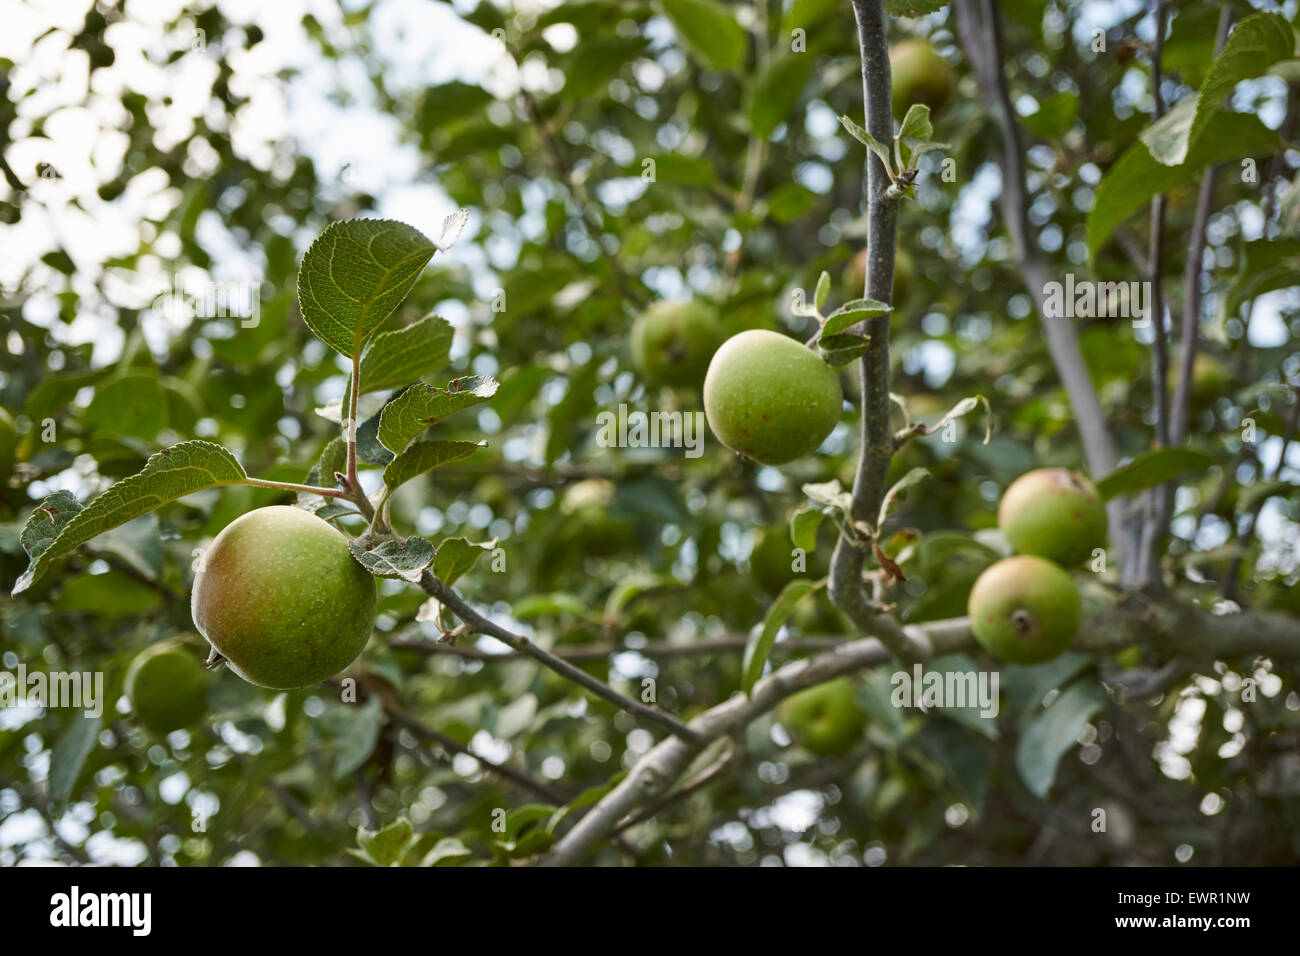 Young apples on the tree, Rodale Institute, Kutztown, PA, USA Stock Photo